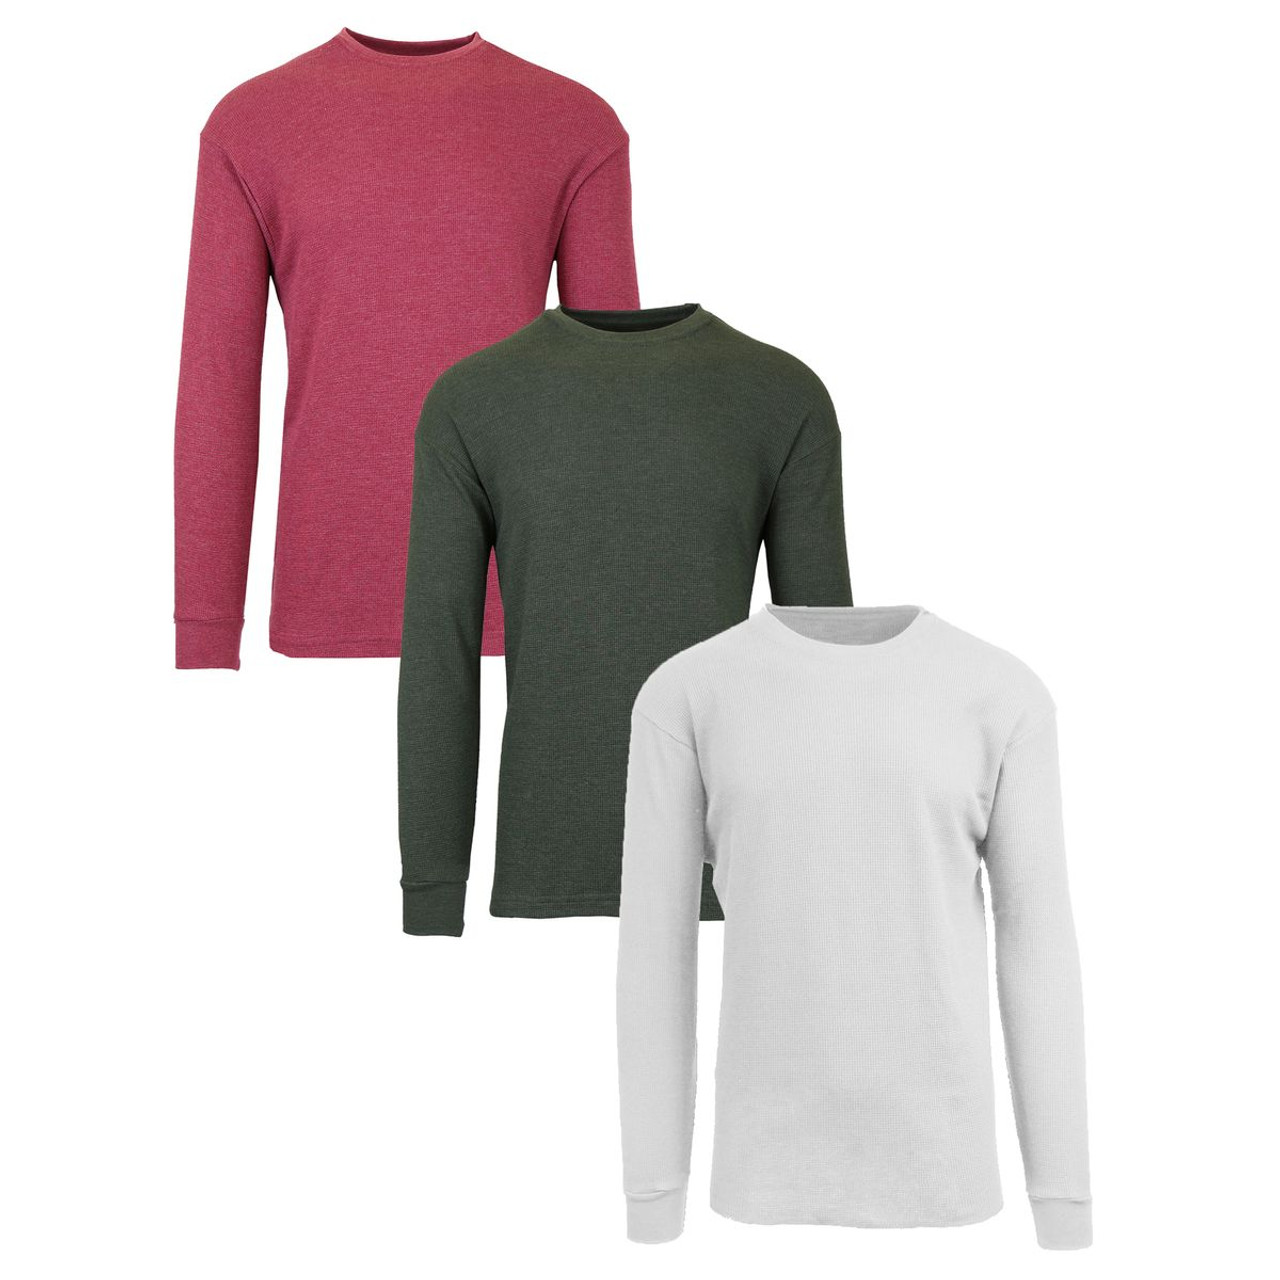 Men's Long Sleeve Thermal Shirts (3-Pack) product image